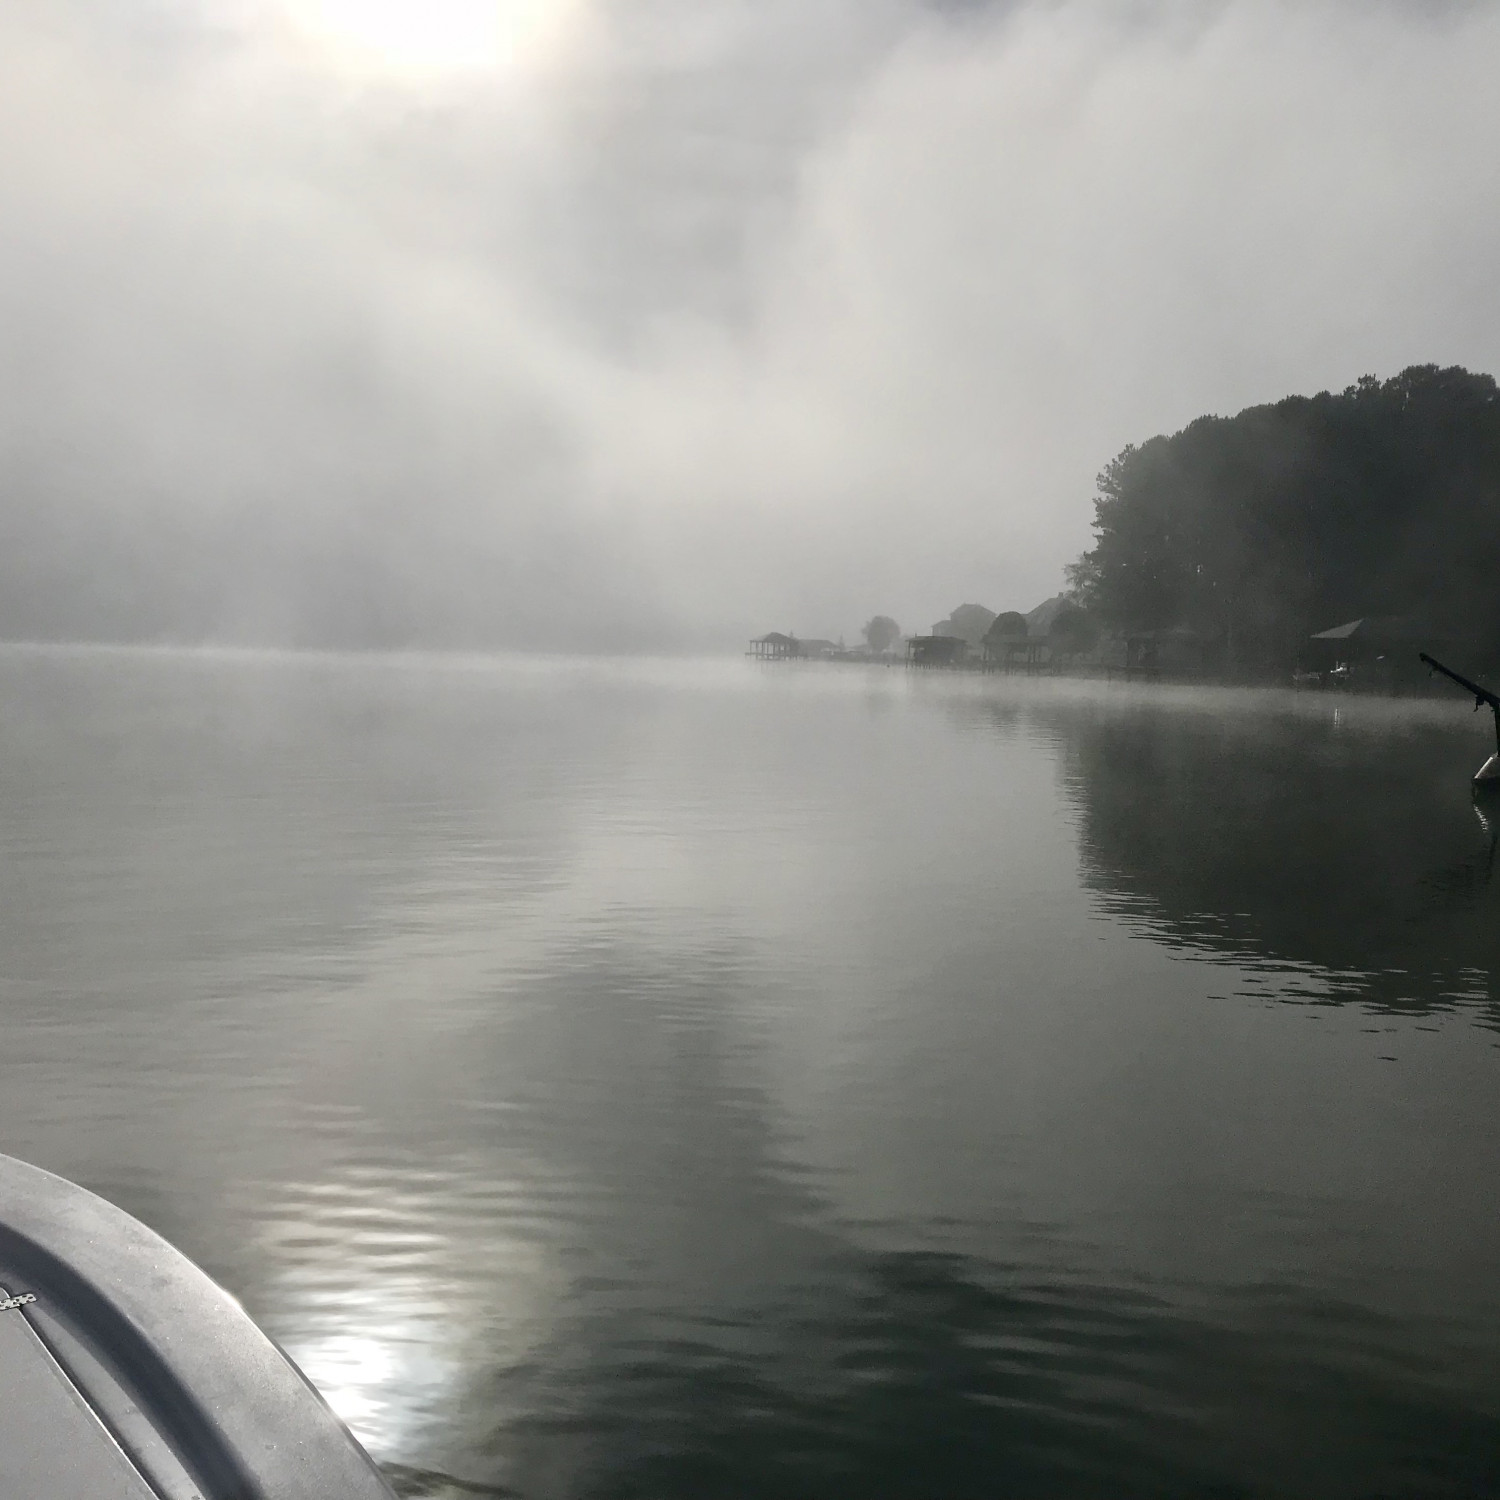 Taken early one morning on Tellico Lake as we were heading out on our first fishing trip in the new...